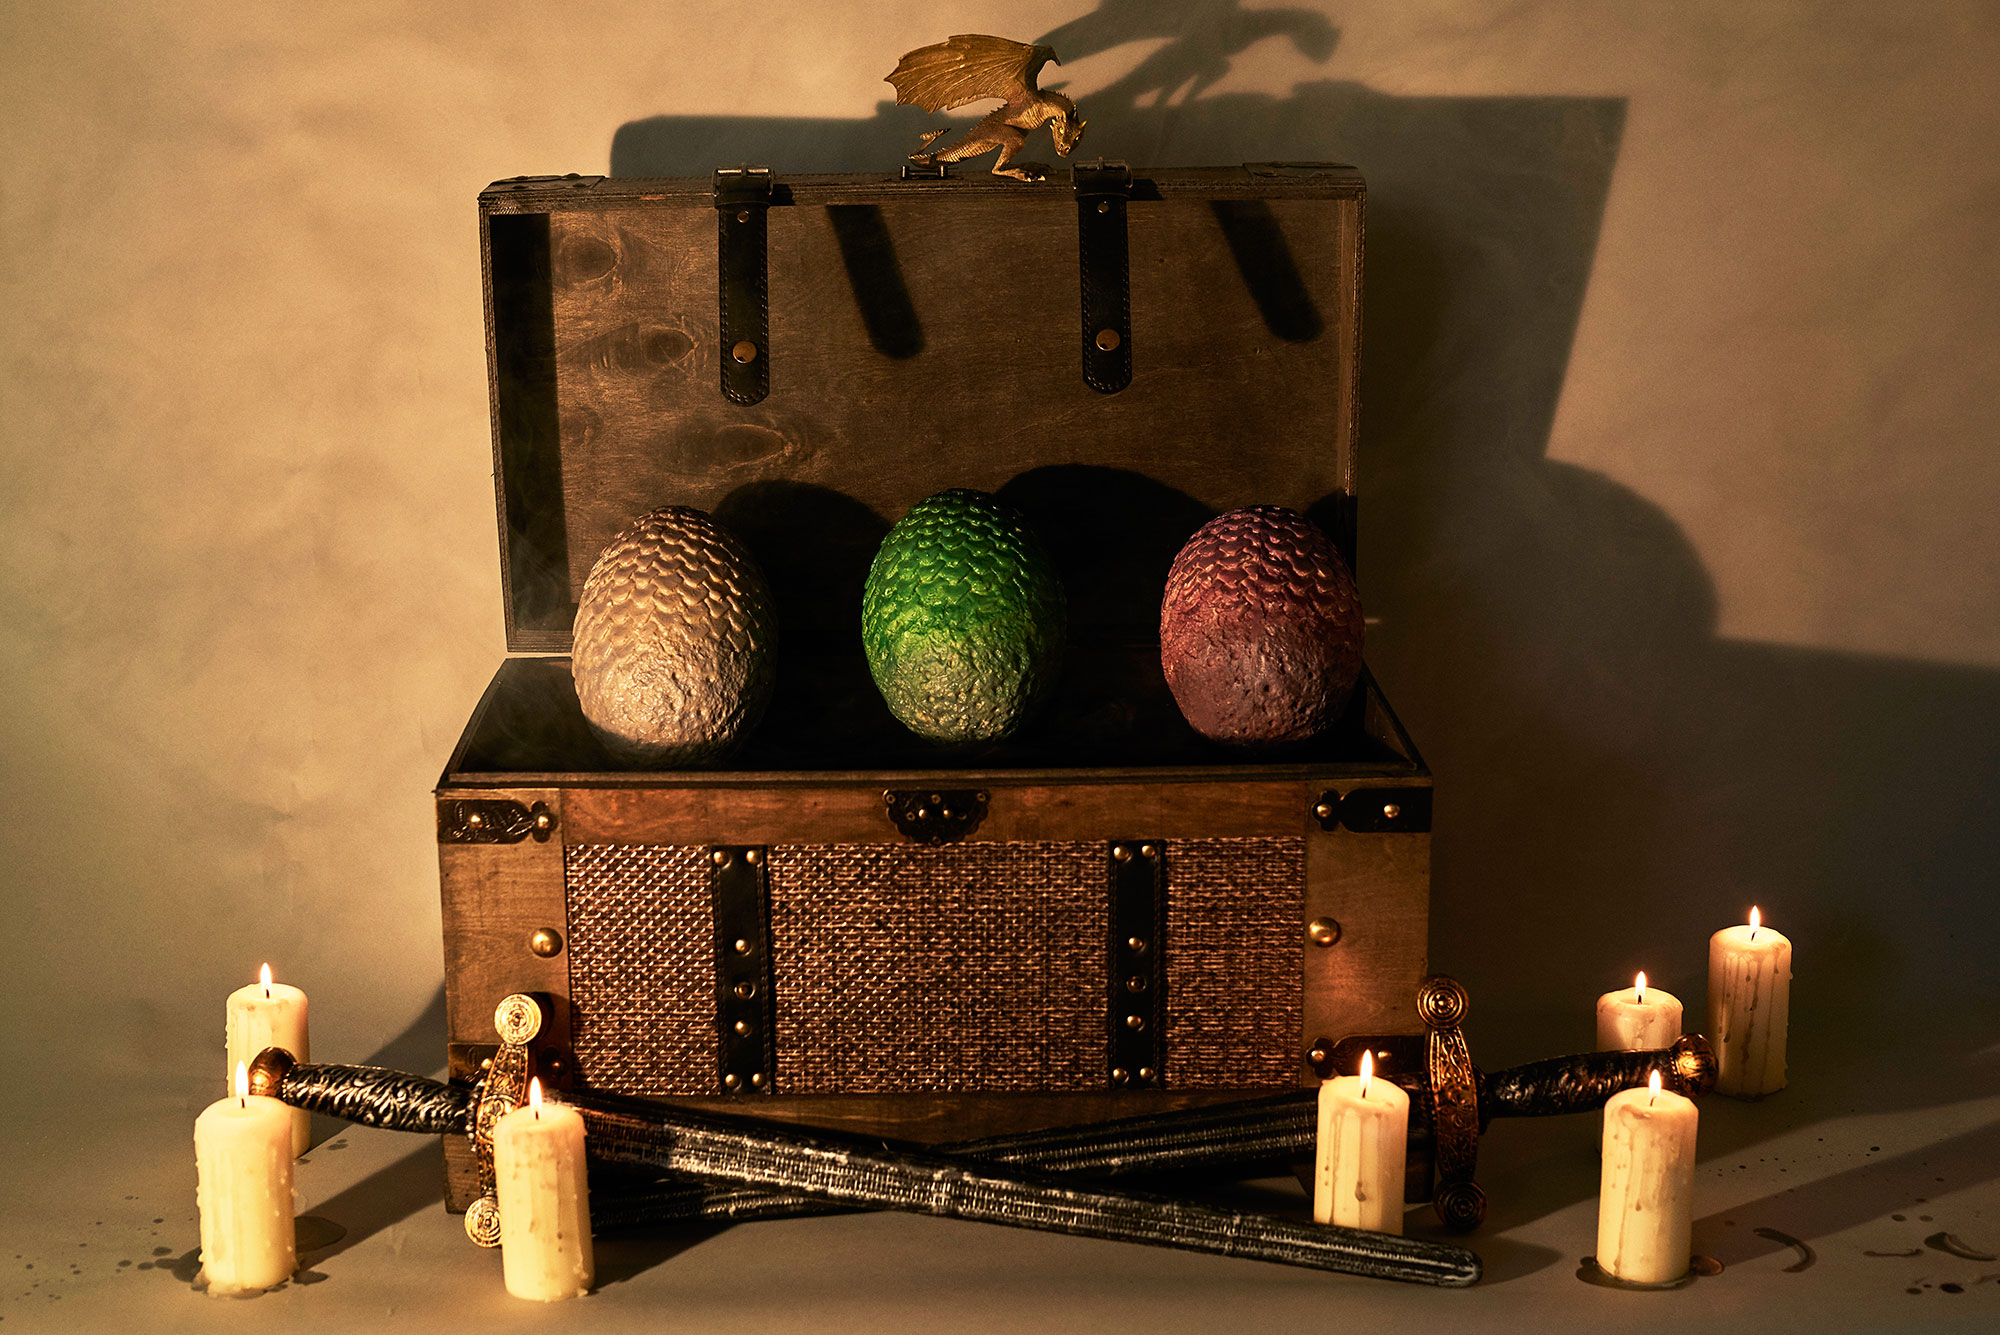 Chocolate Dragon Egg Is Fit for Easter, 'Game of Thrones' Premiere